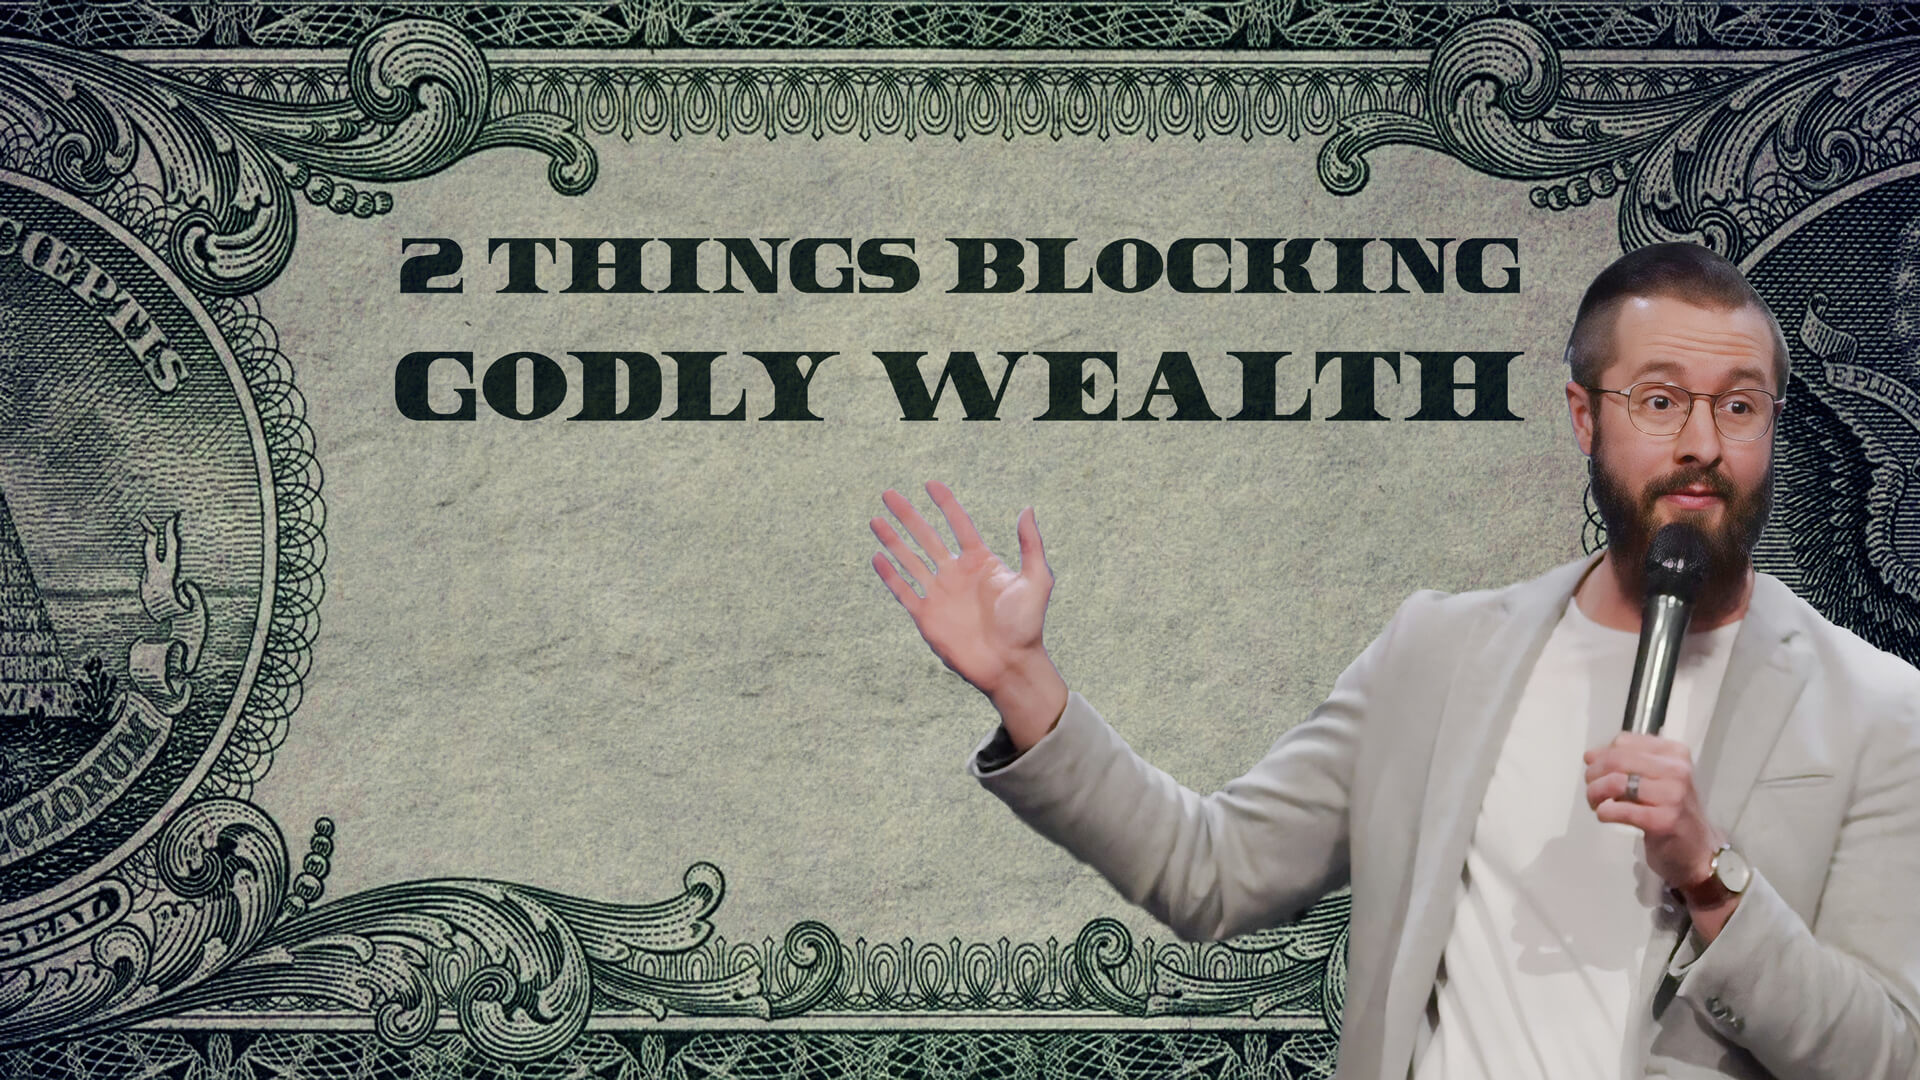 Two Things Blocking Godly Wealth